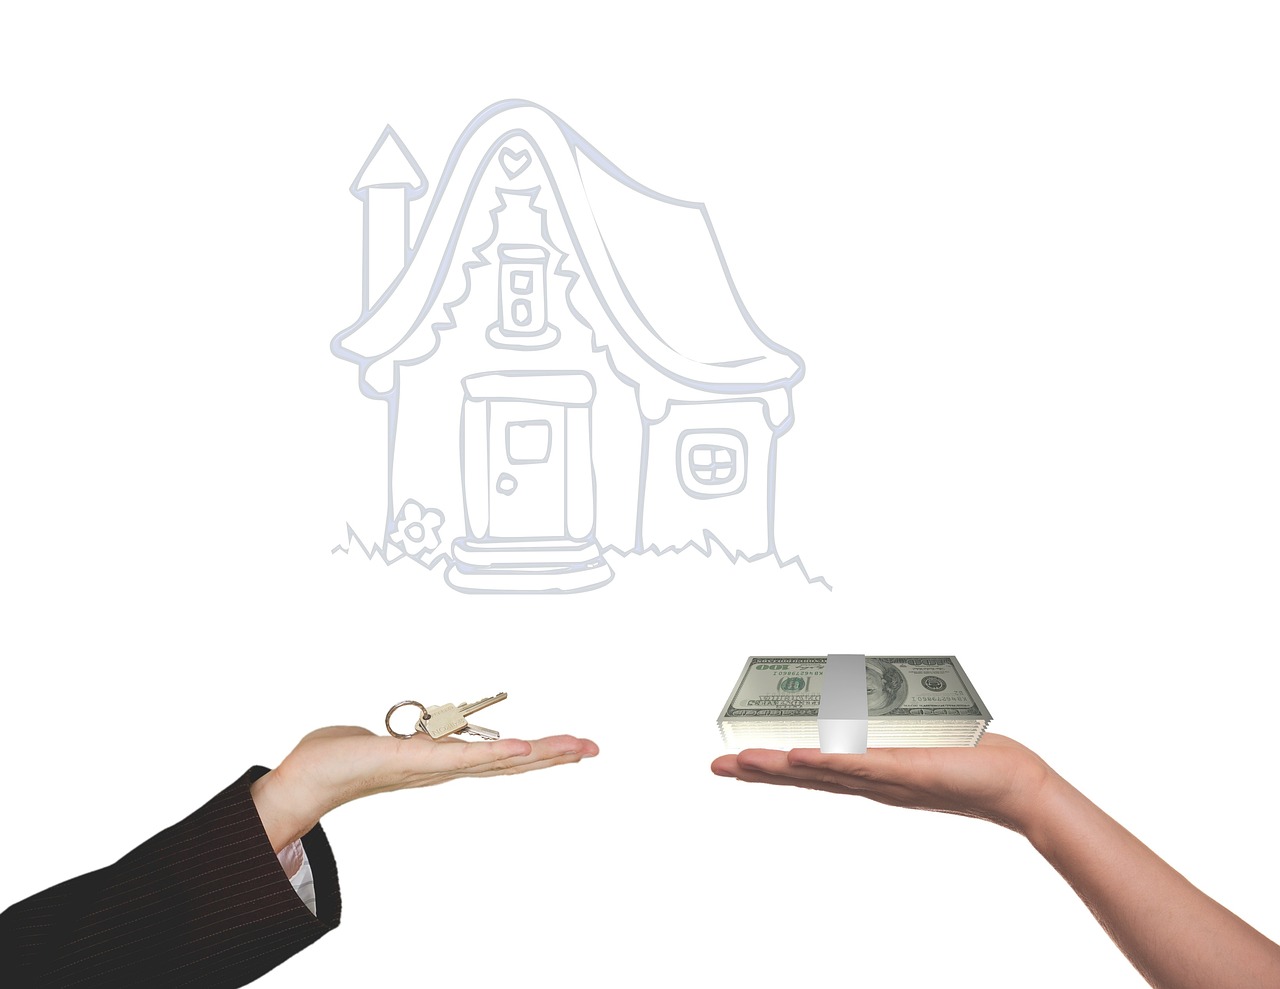 two people exchanging money in front of a drawing of a house, an illustration of, advertisement photo, isolated on white background, keys, discovered photo